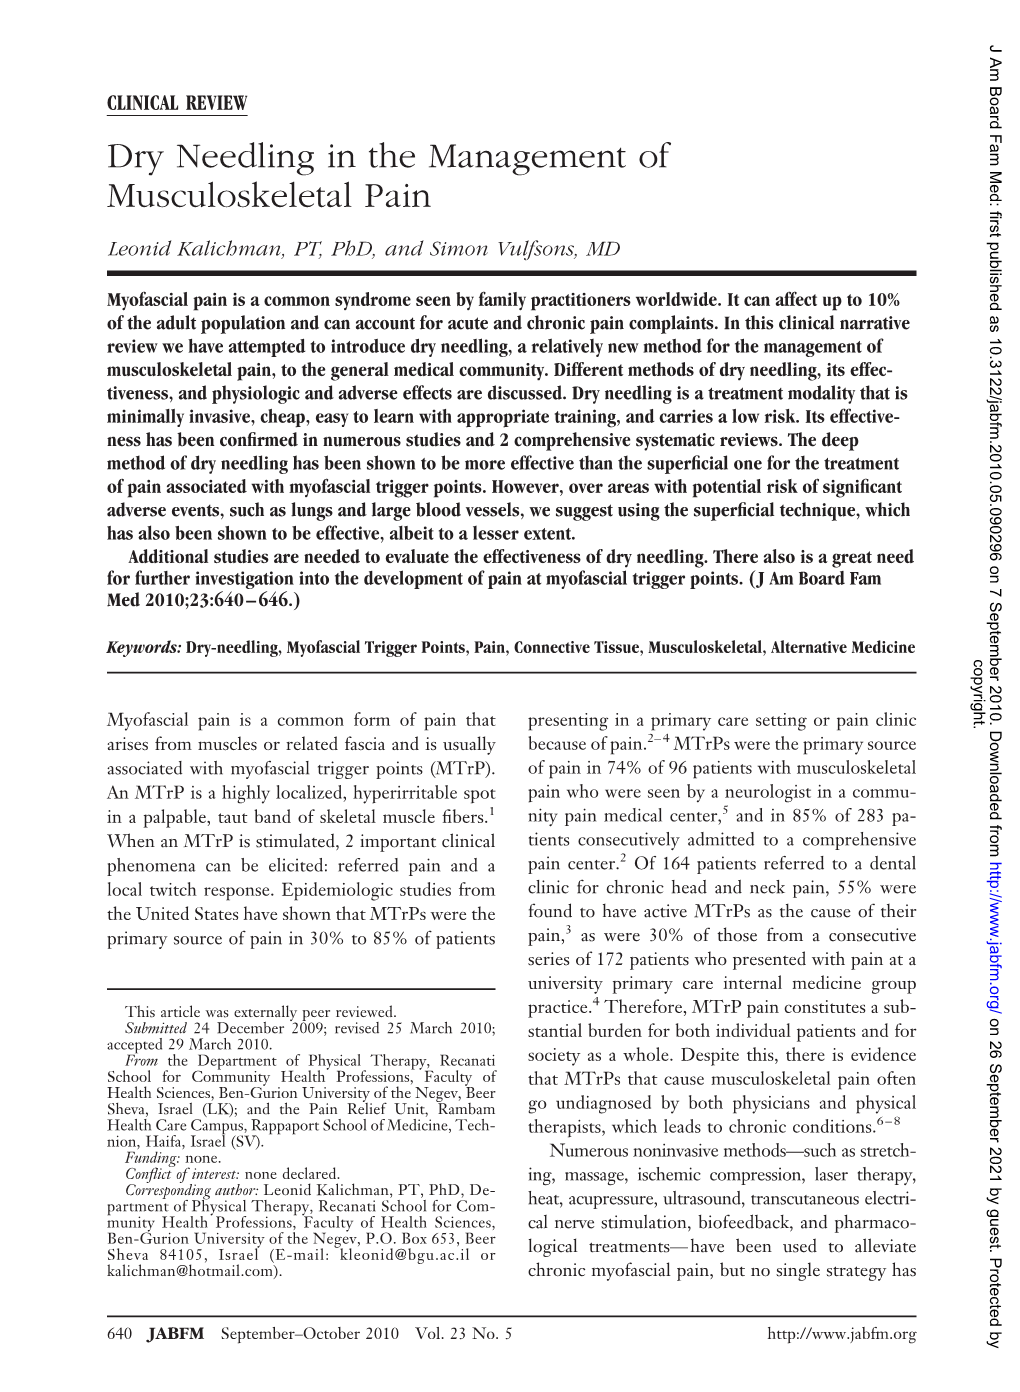 Dry Needling in the Management of Musculoskeletal Pain